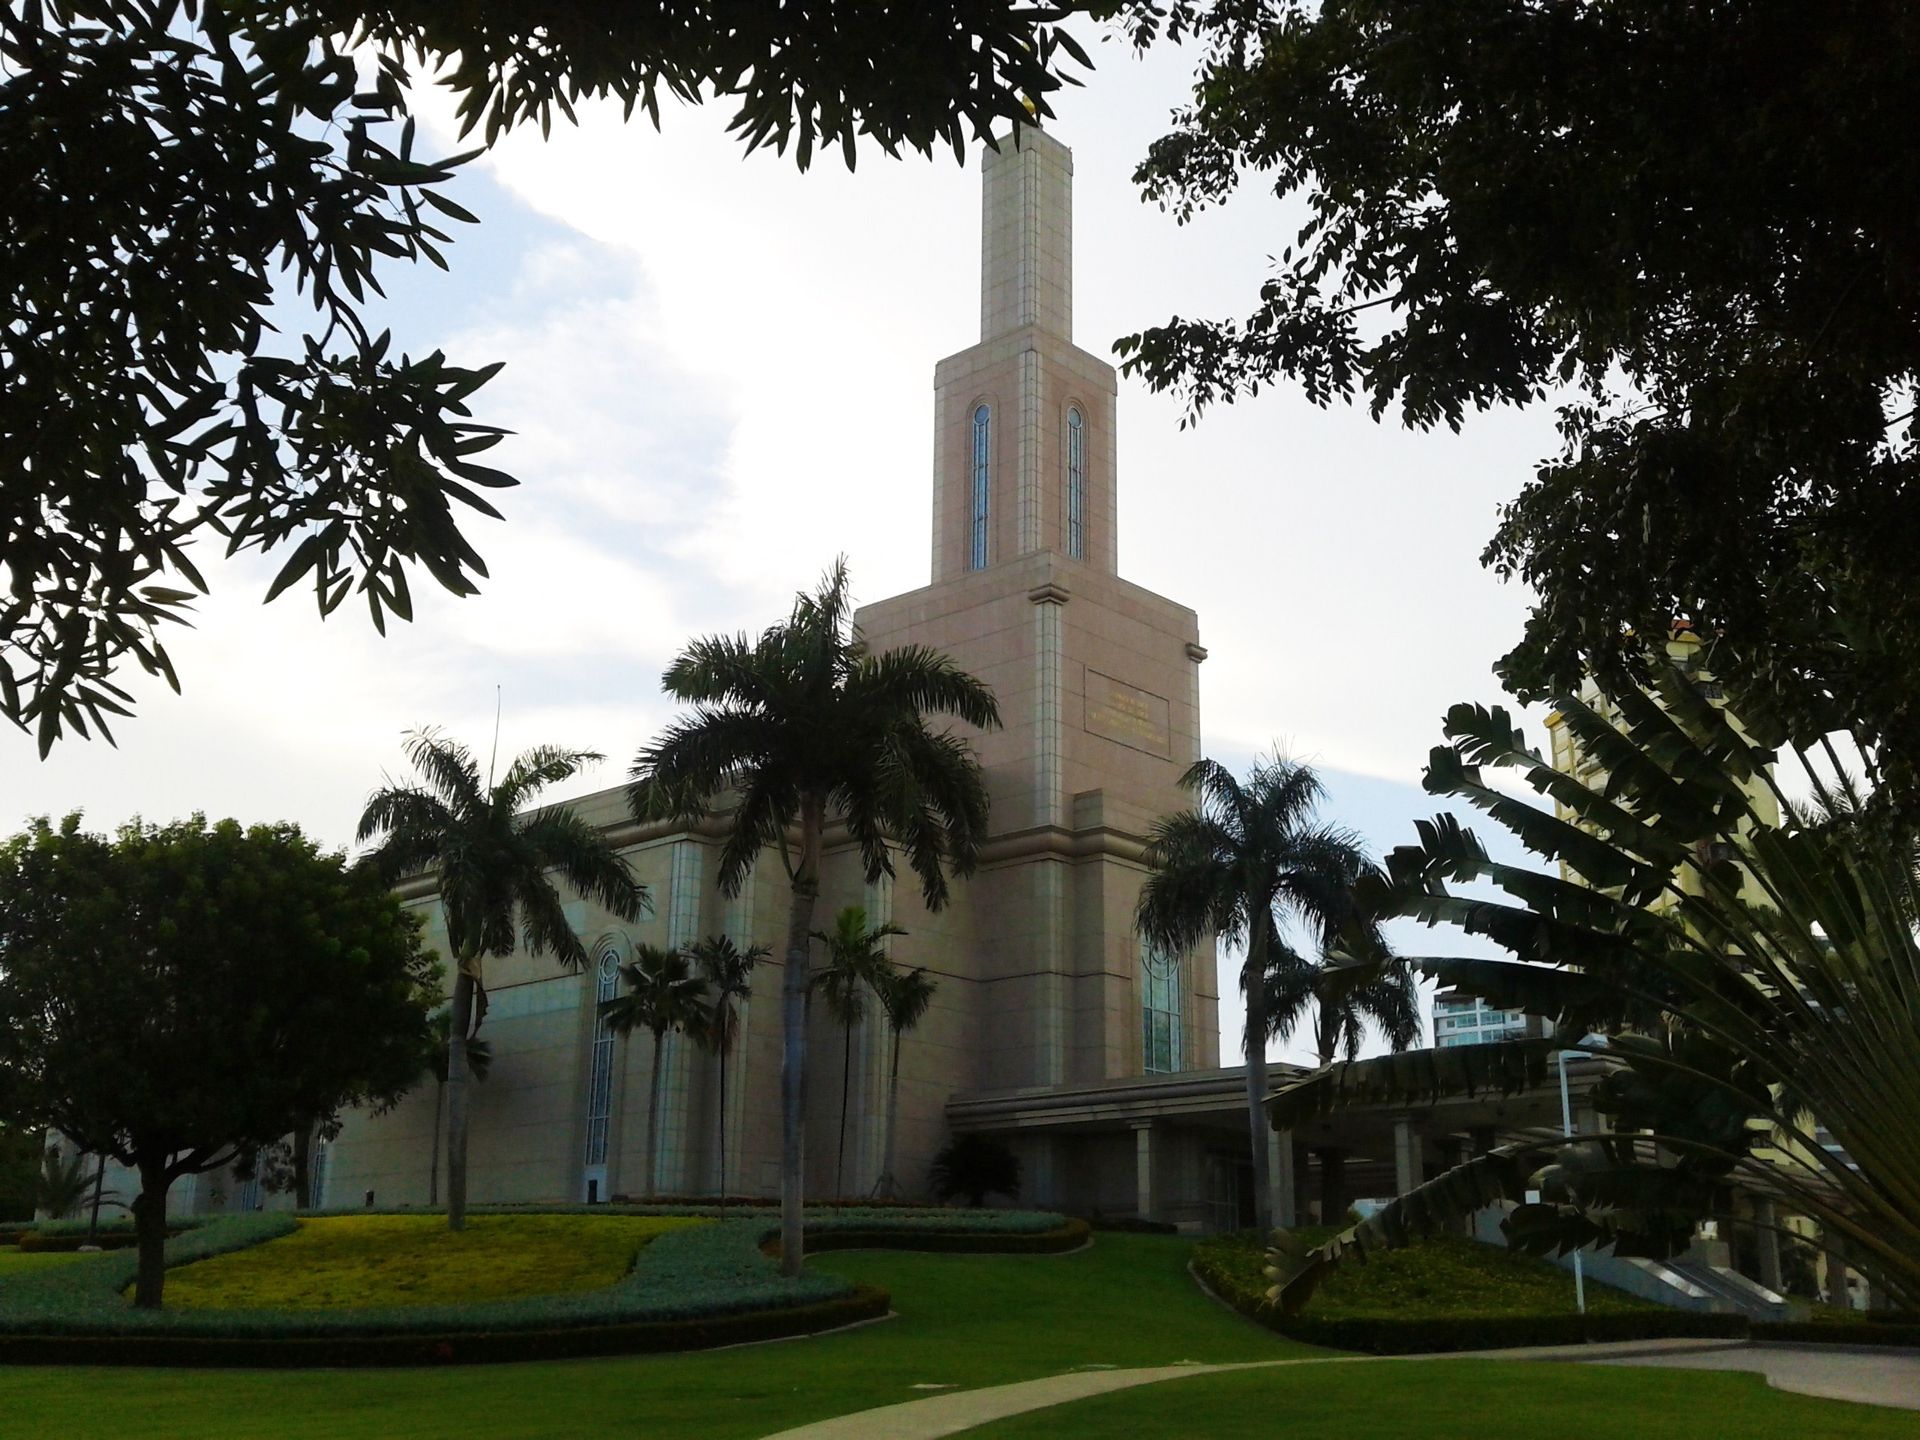 The Santo Domingo Dominican Republic Temple side view, including the scenery and entrance.